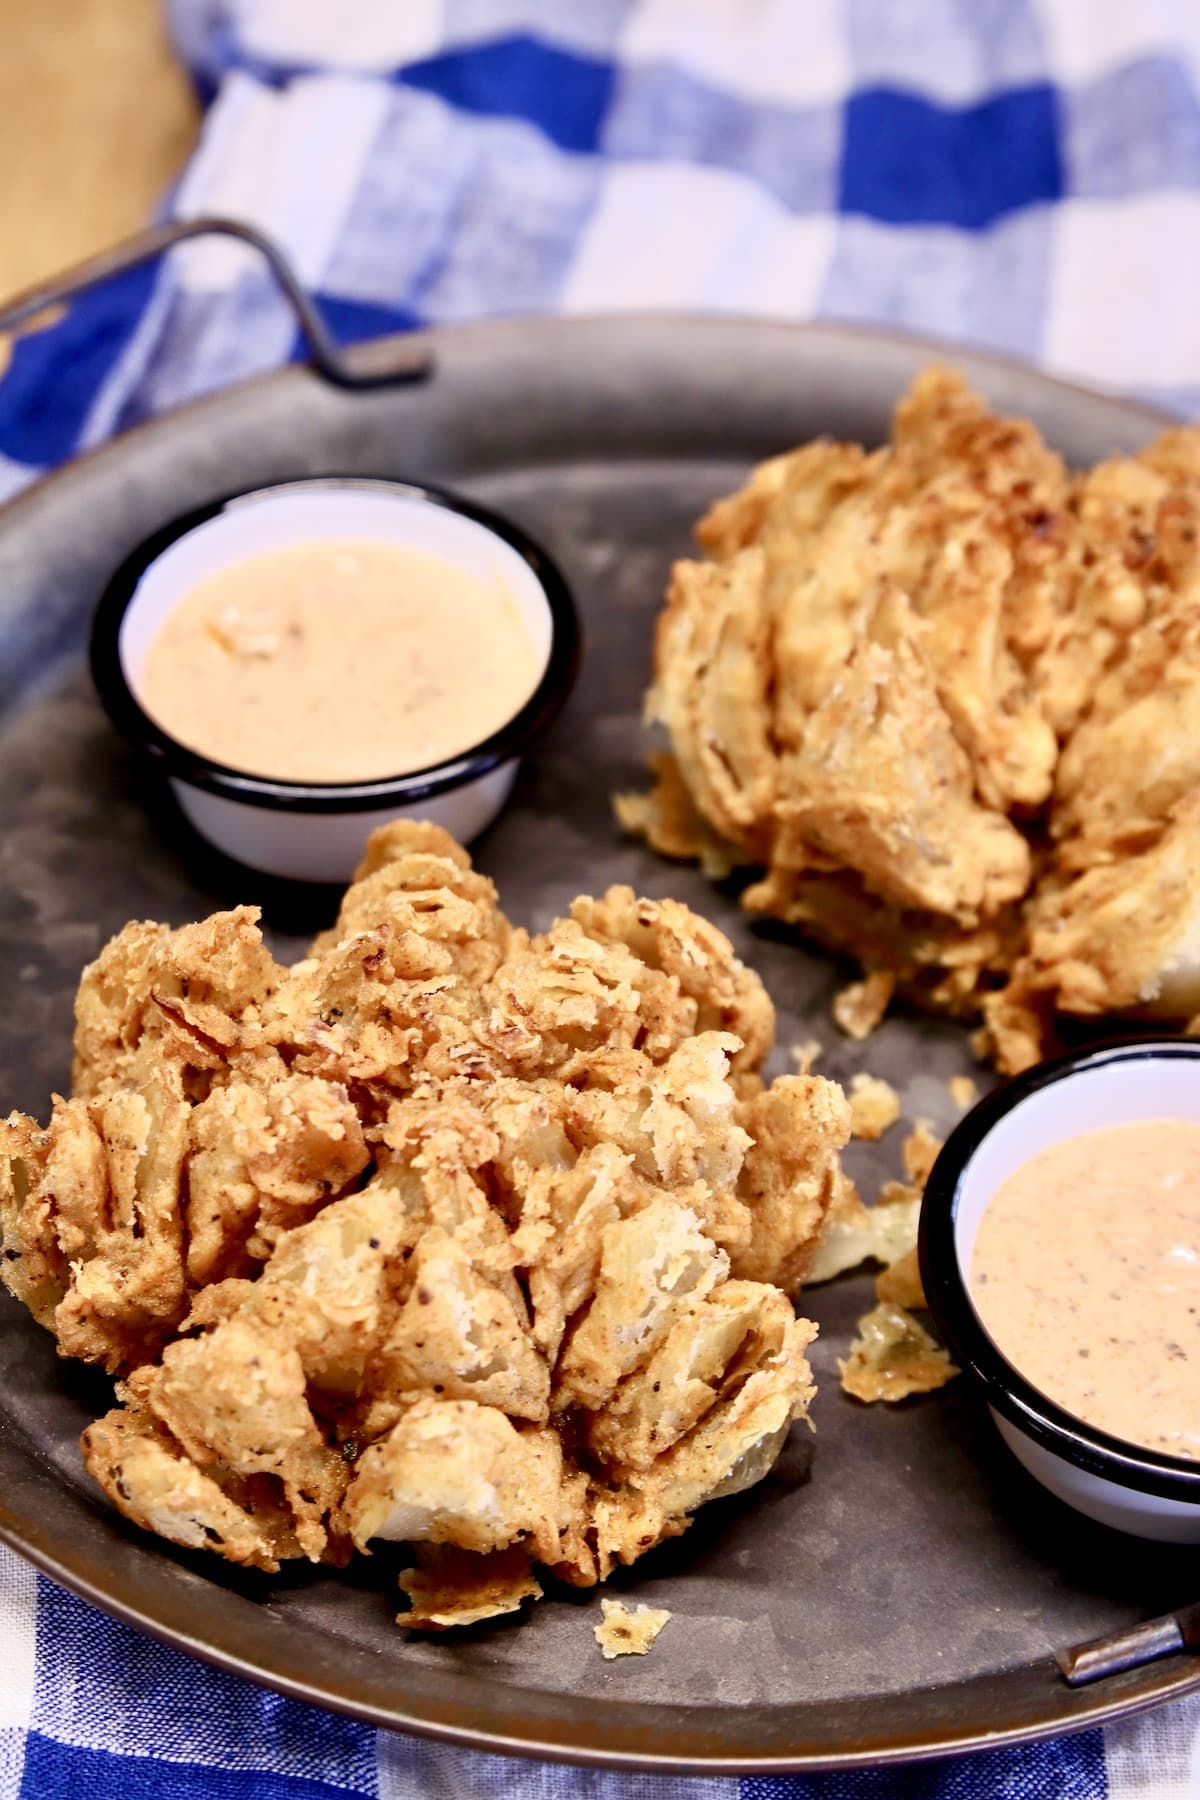 Blooming onions and sauce on a platter.